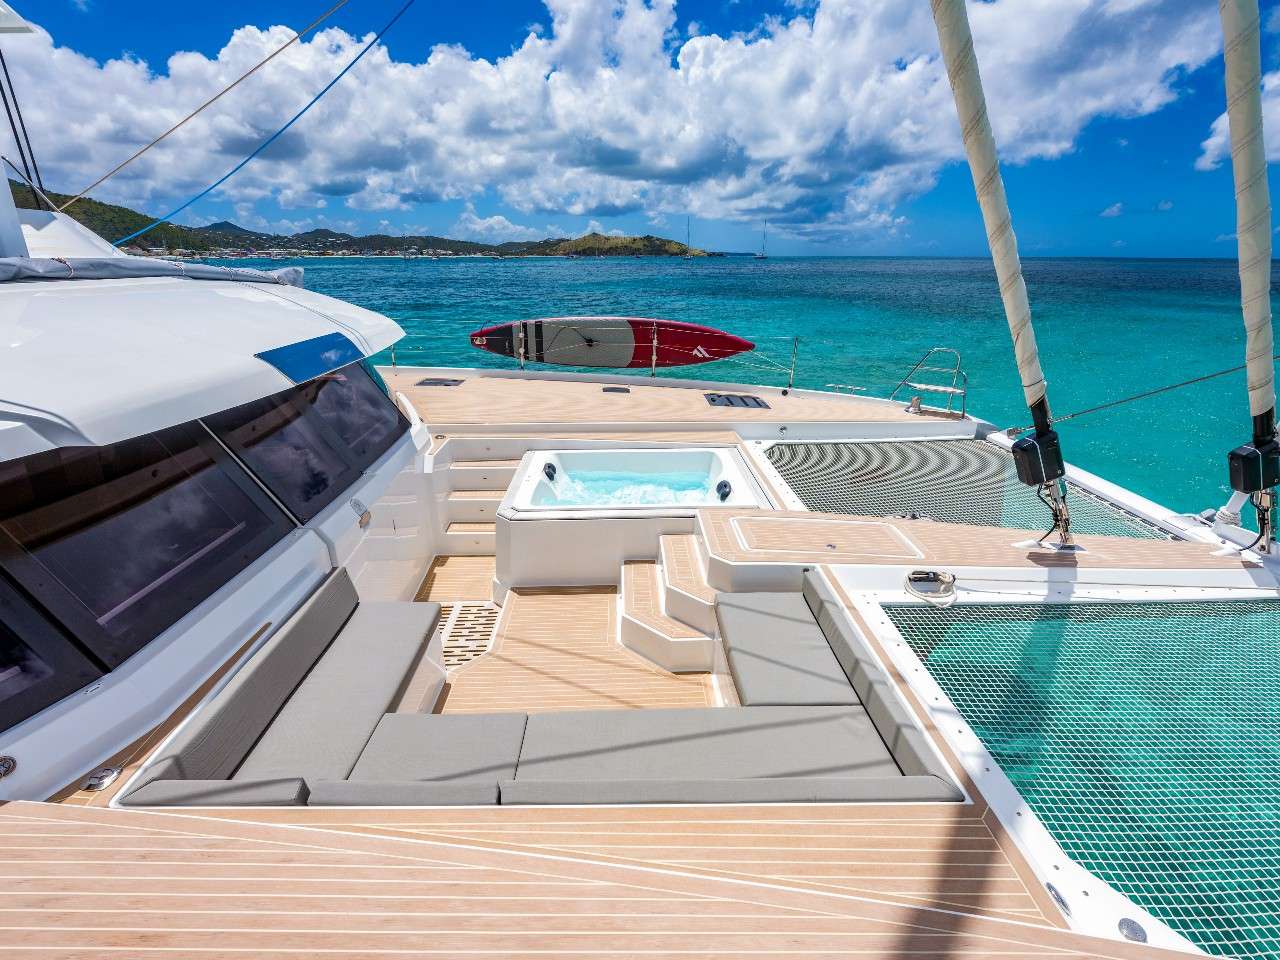 Jacuzzi and foredeck